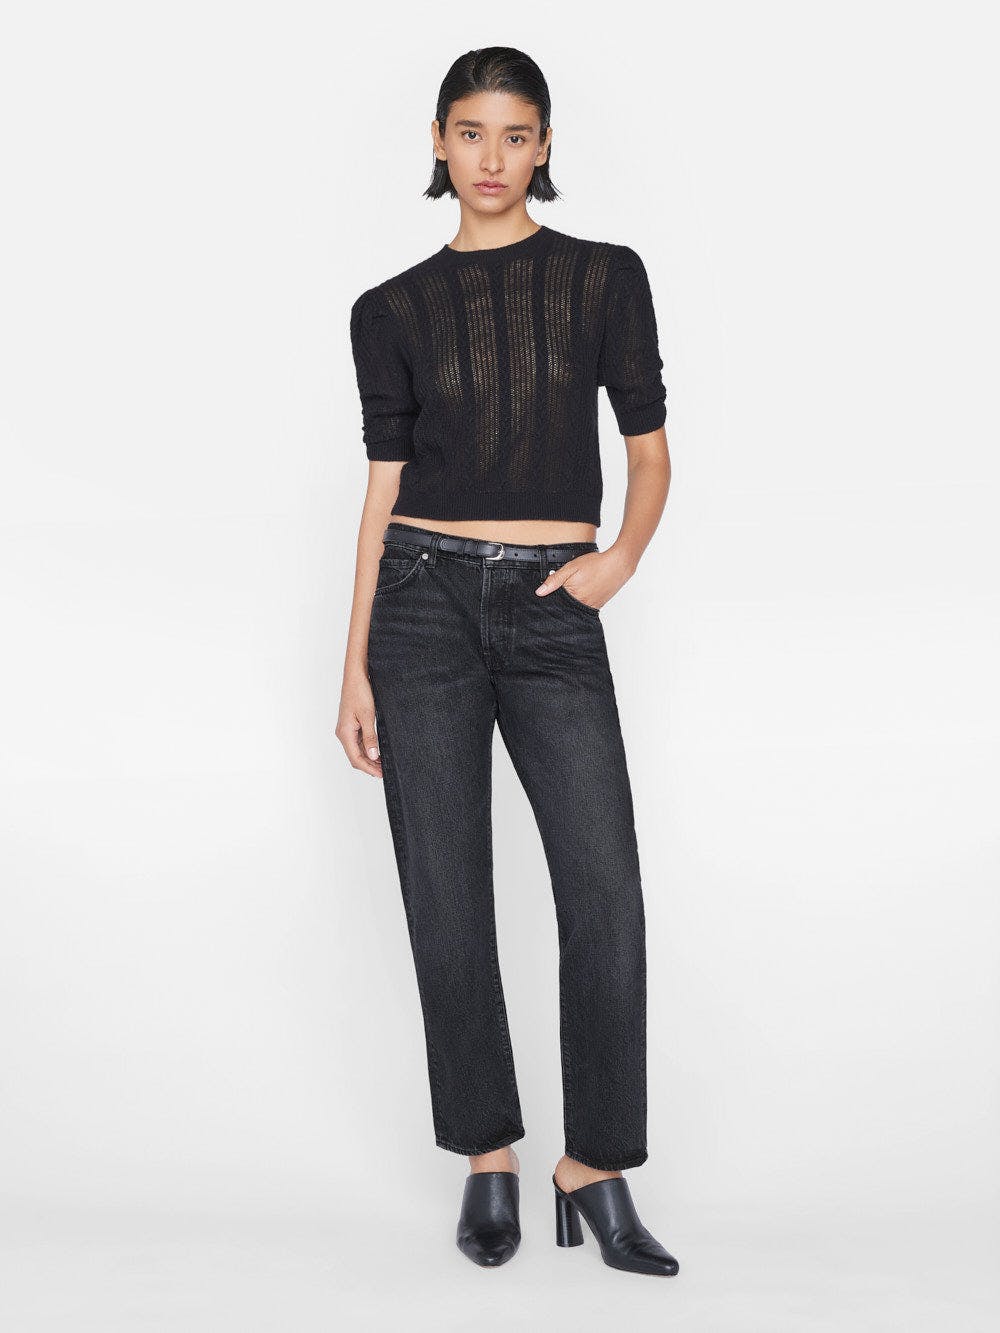 The model is wearing Le Slouch - Pompei black cropped jeans made from sustainable denim, paired with a black sweater.